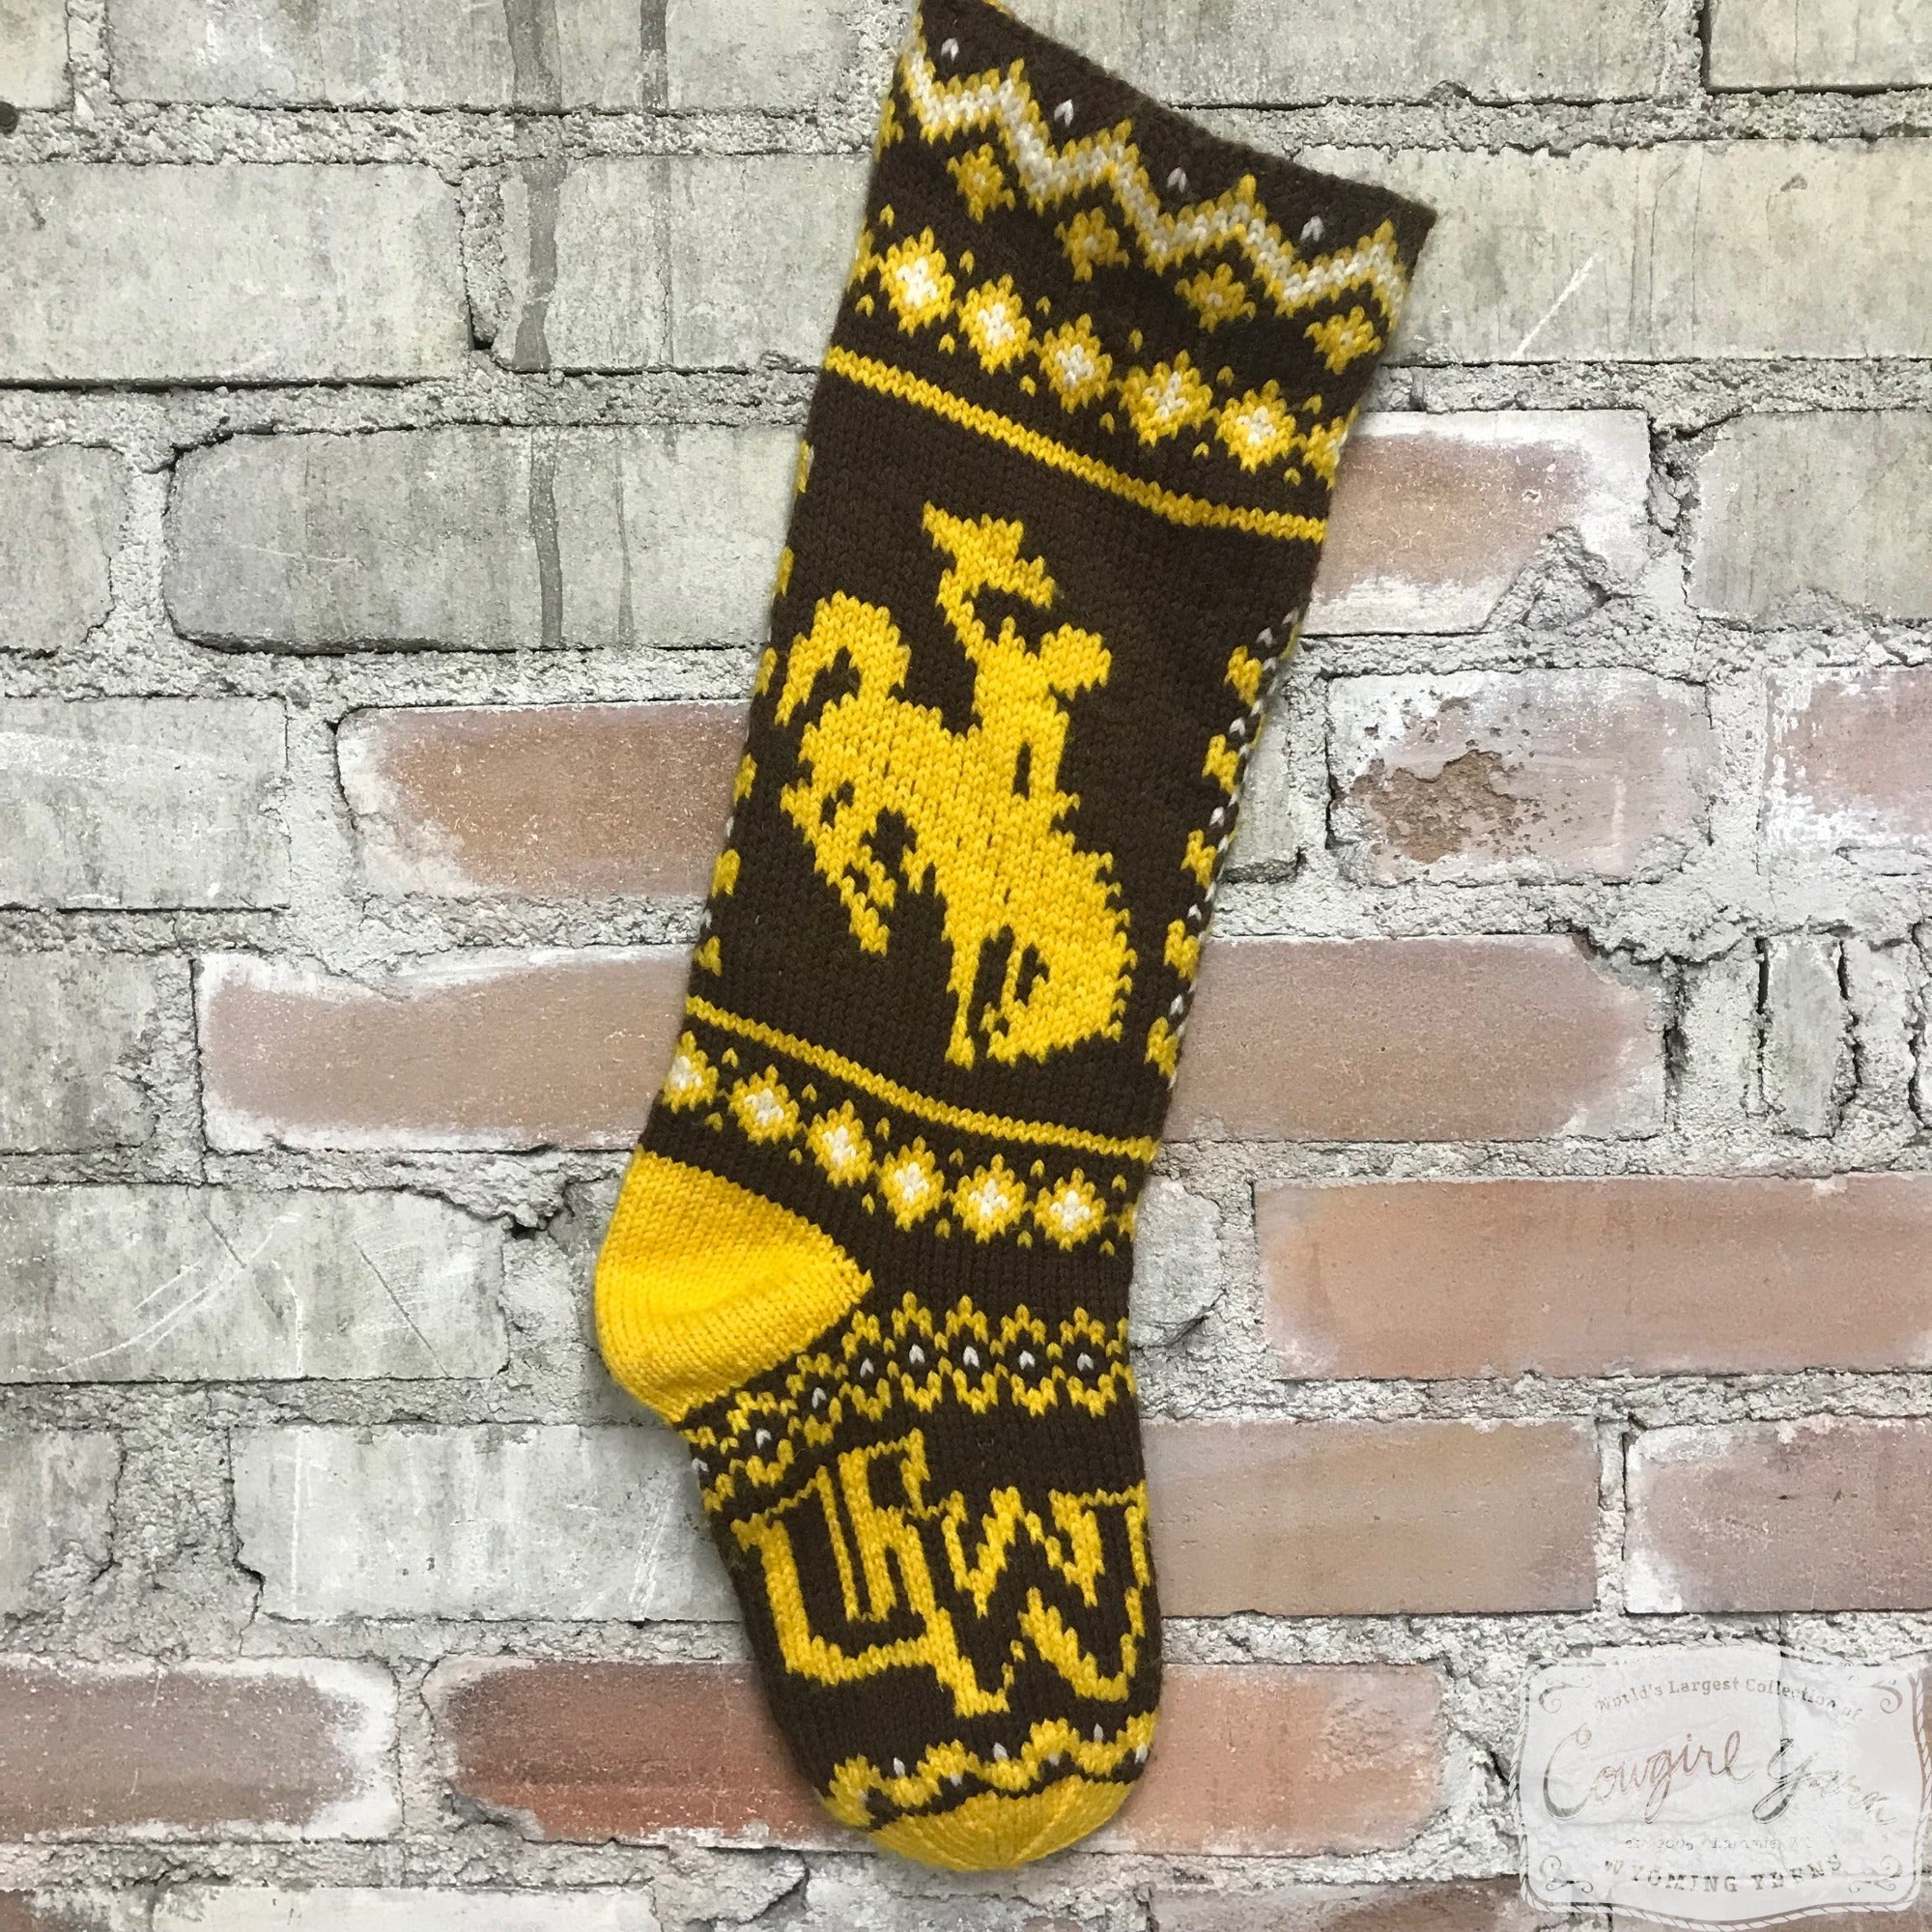 A brown and gold knitted stocking featuring the Steamboat icon hanging on a brick wall